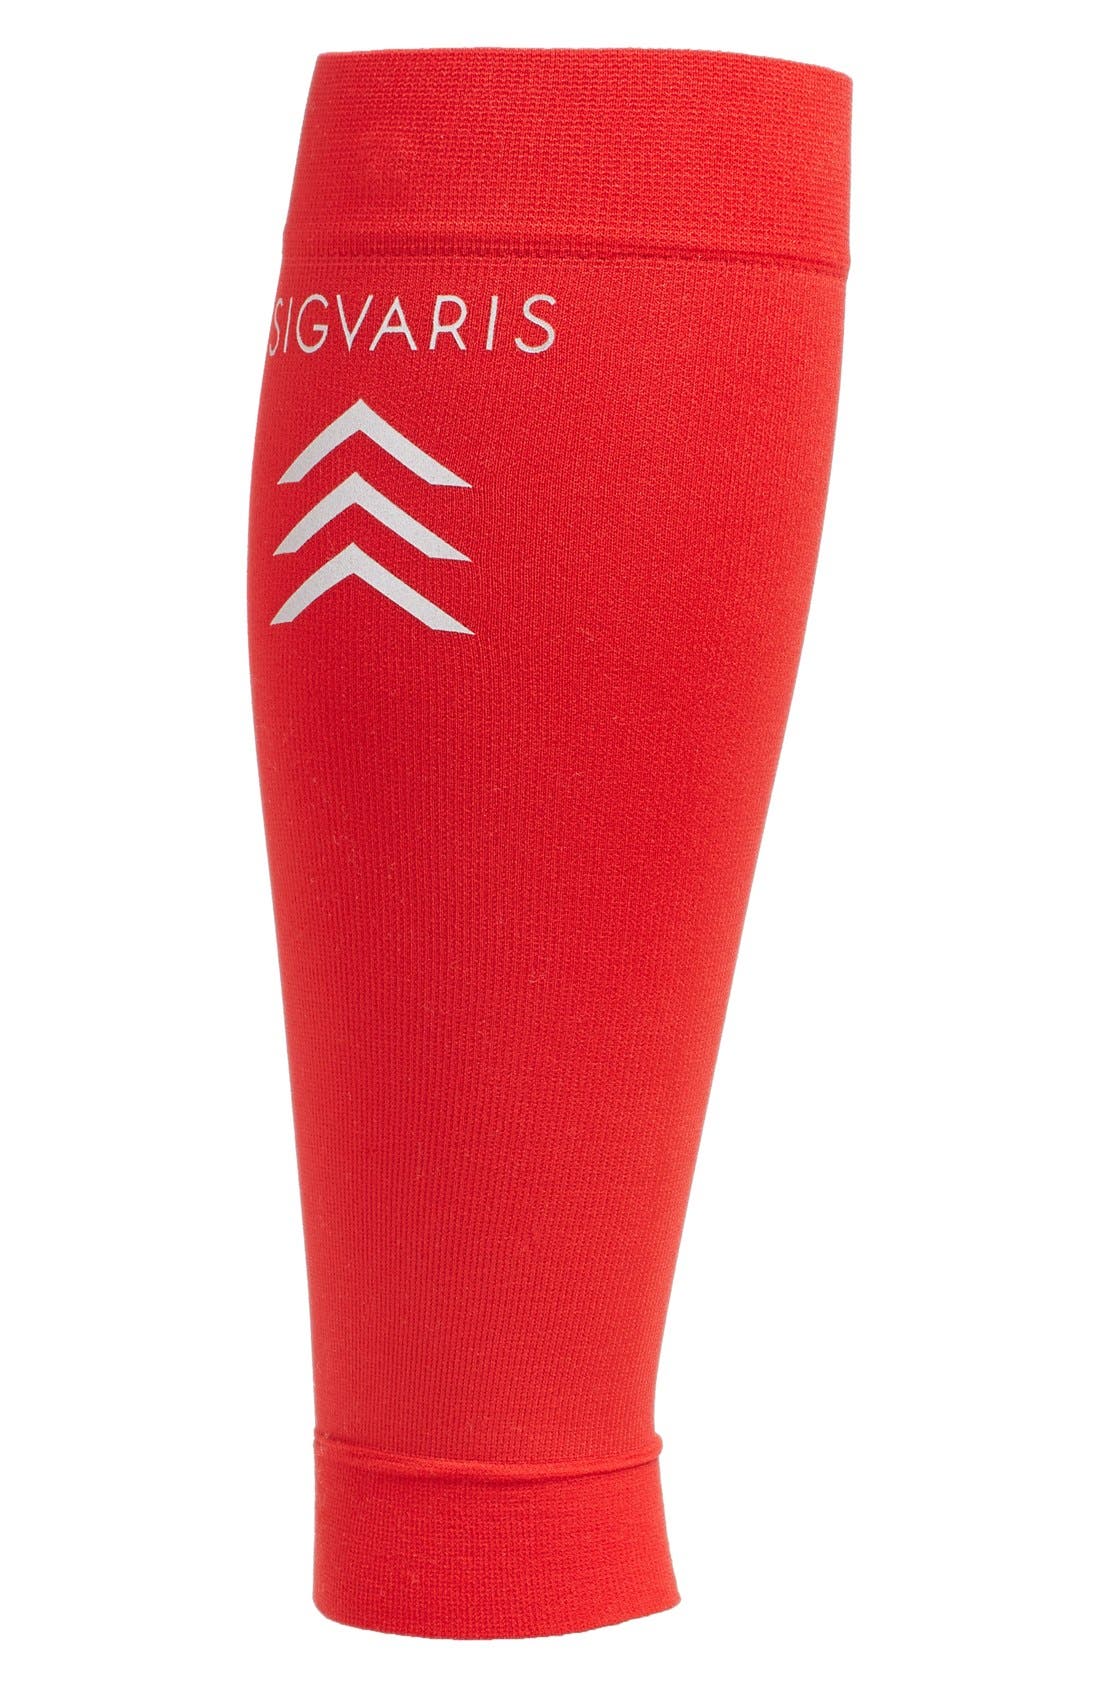 UPC 745129219888 product image for Men's Insignia By Sigvaris 'Sports' Graduated Compression Performance Calf Sleev | upcitemdb.com